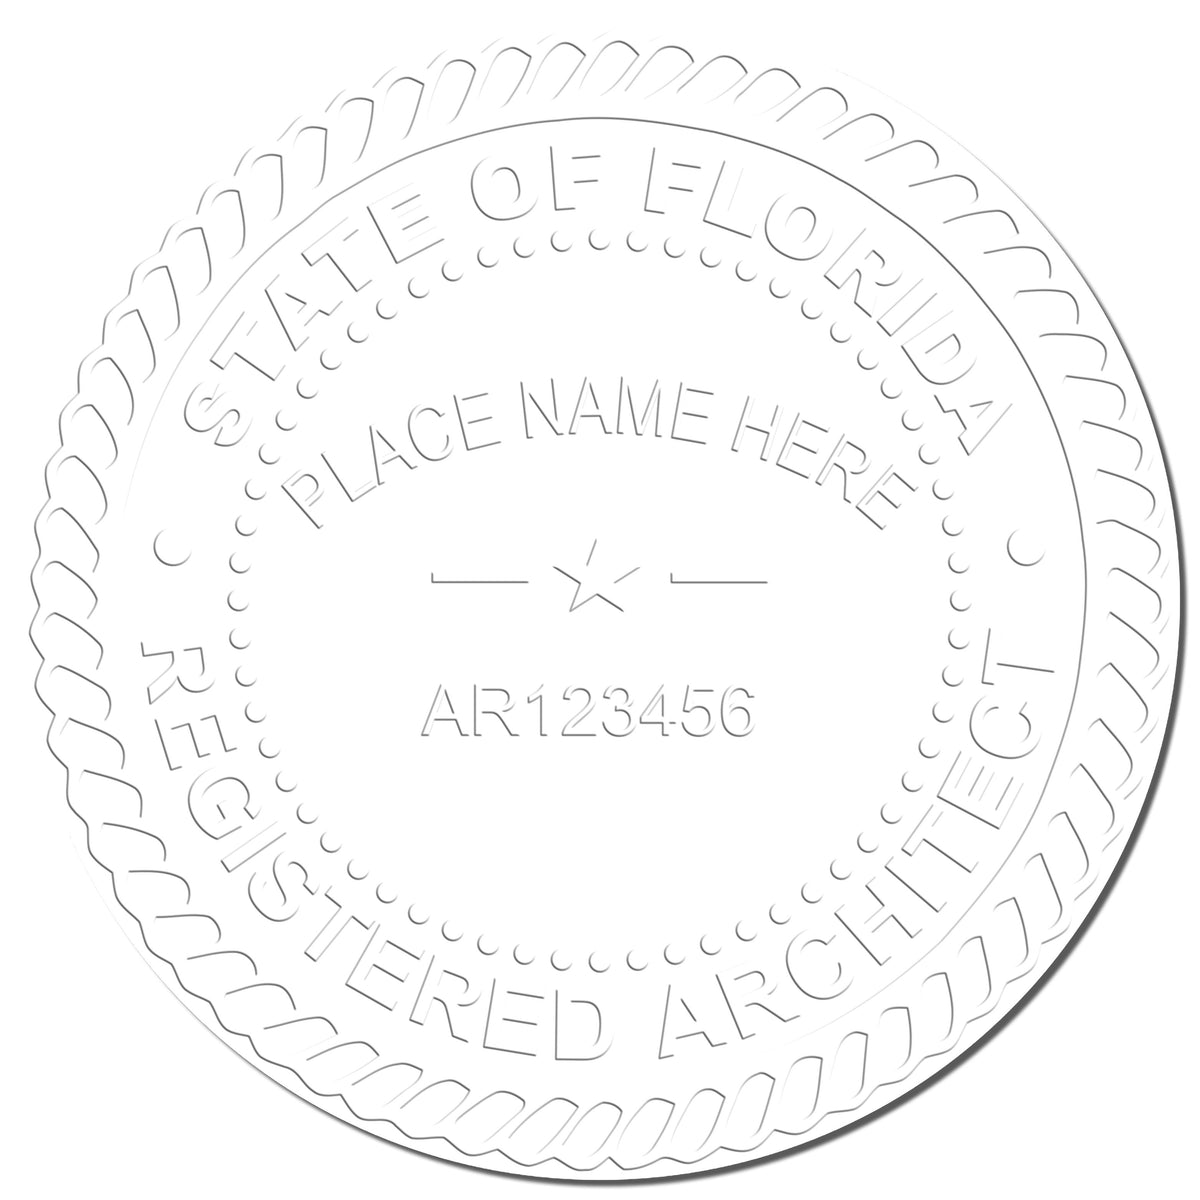 A photograph of the Extended Long Reach Florida Architect Seal Embosser stamp impression reveals a vivid, professional image of the on paper.